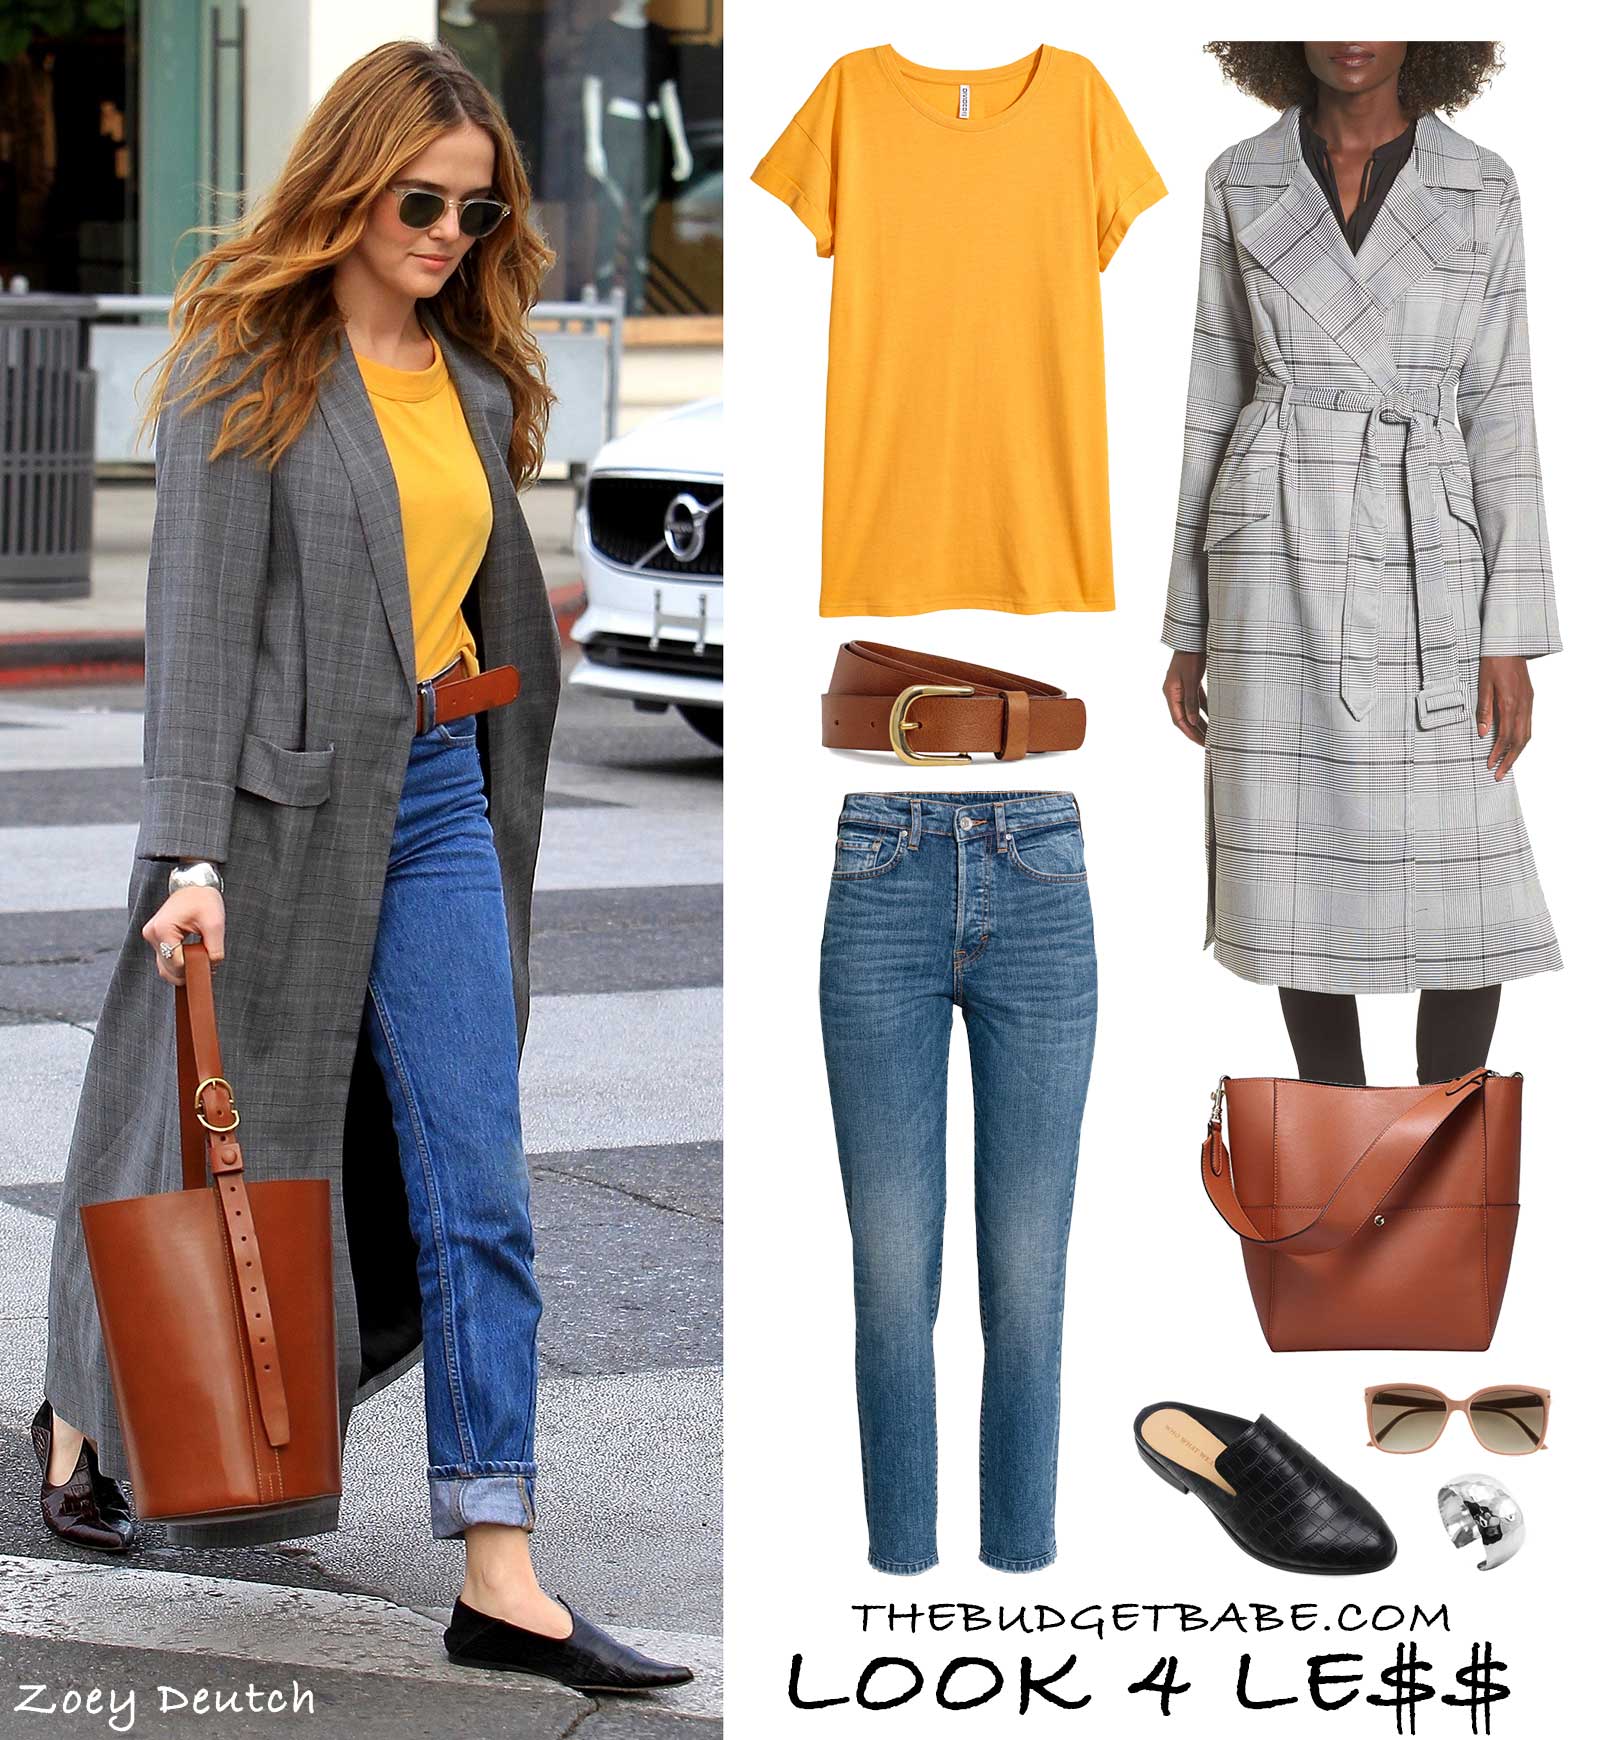 Zoey Deutch steps out in a mustard yellow tee with blue jeans, smoking flats and a longline plaid duster coat.